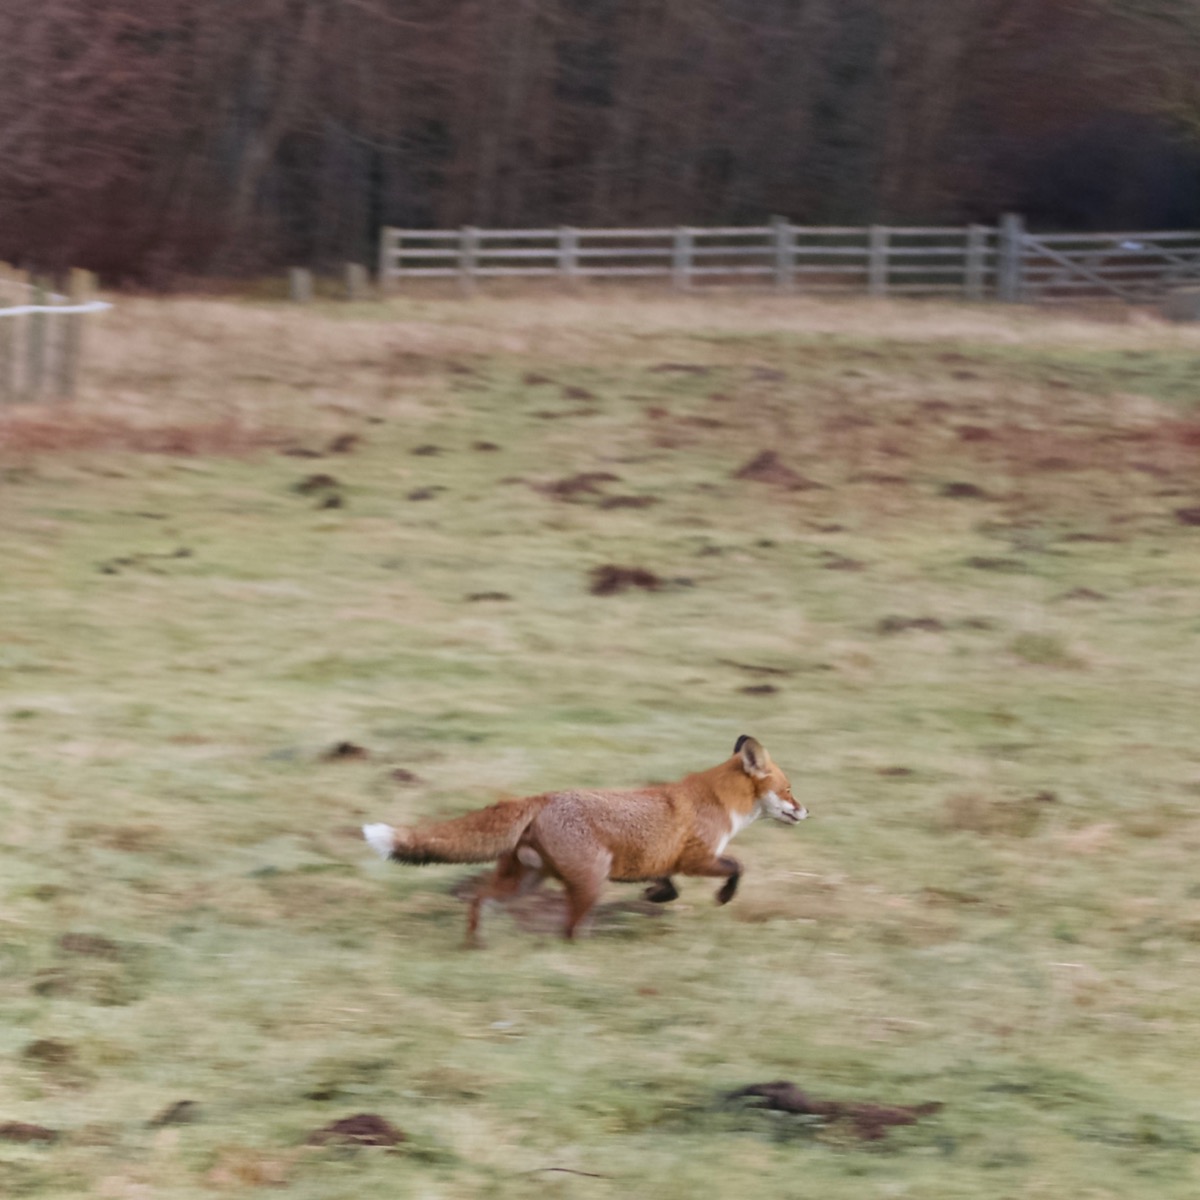 Fox running across a field, with motion blurred background